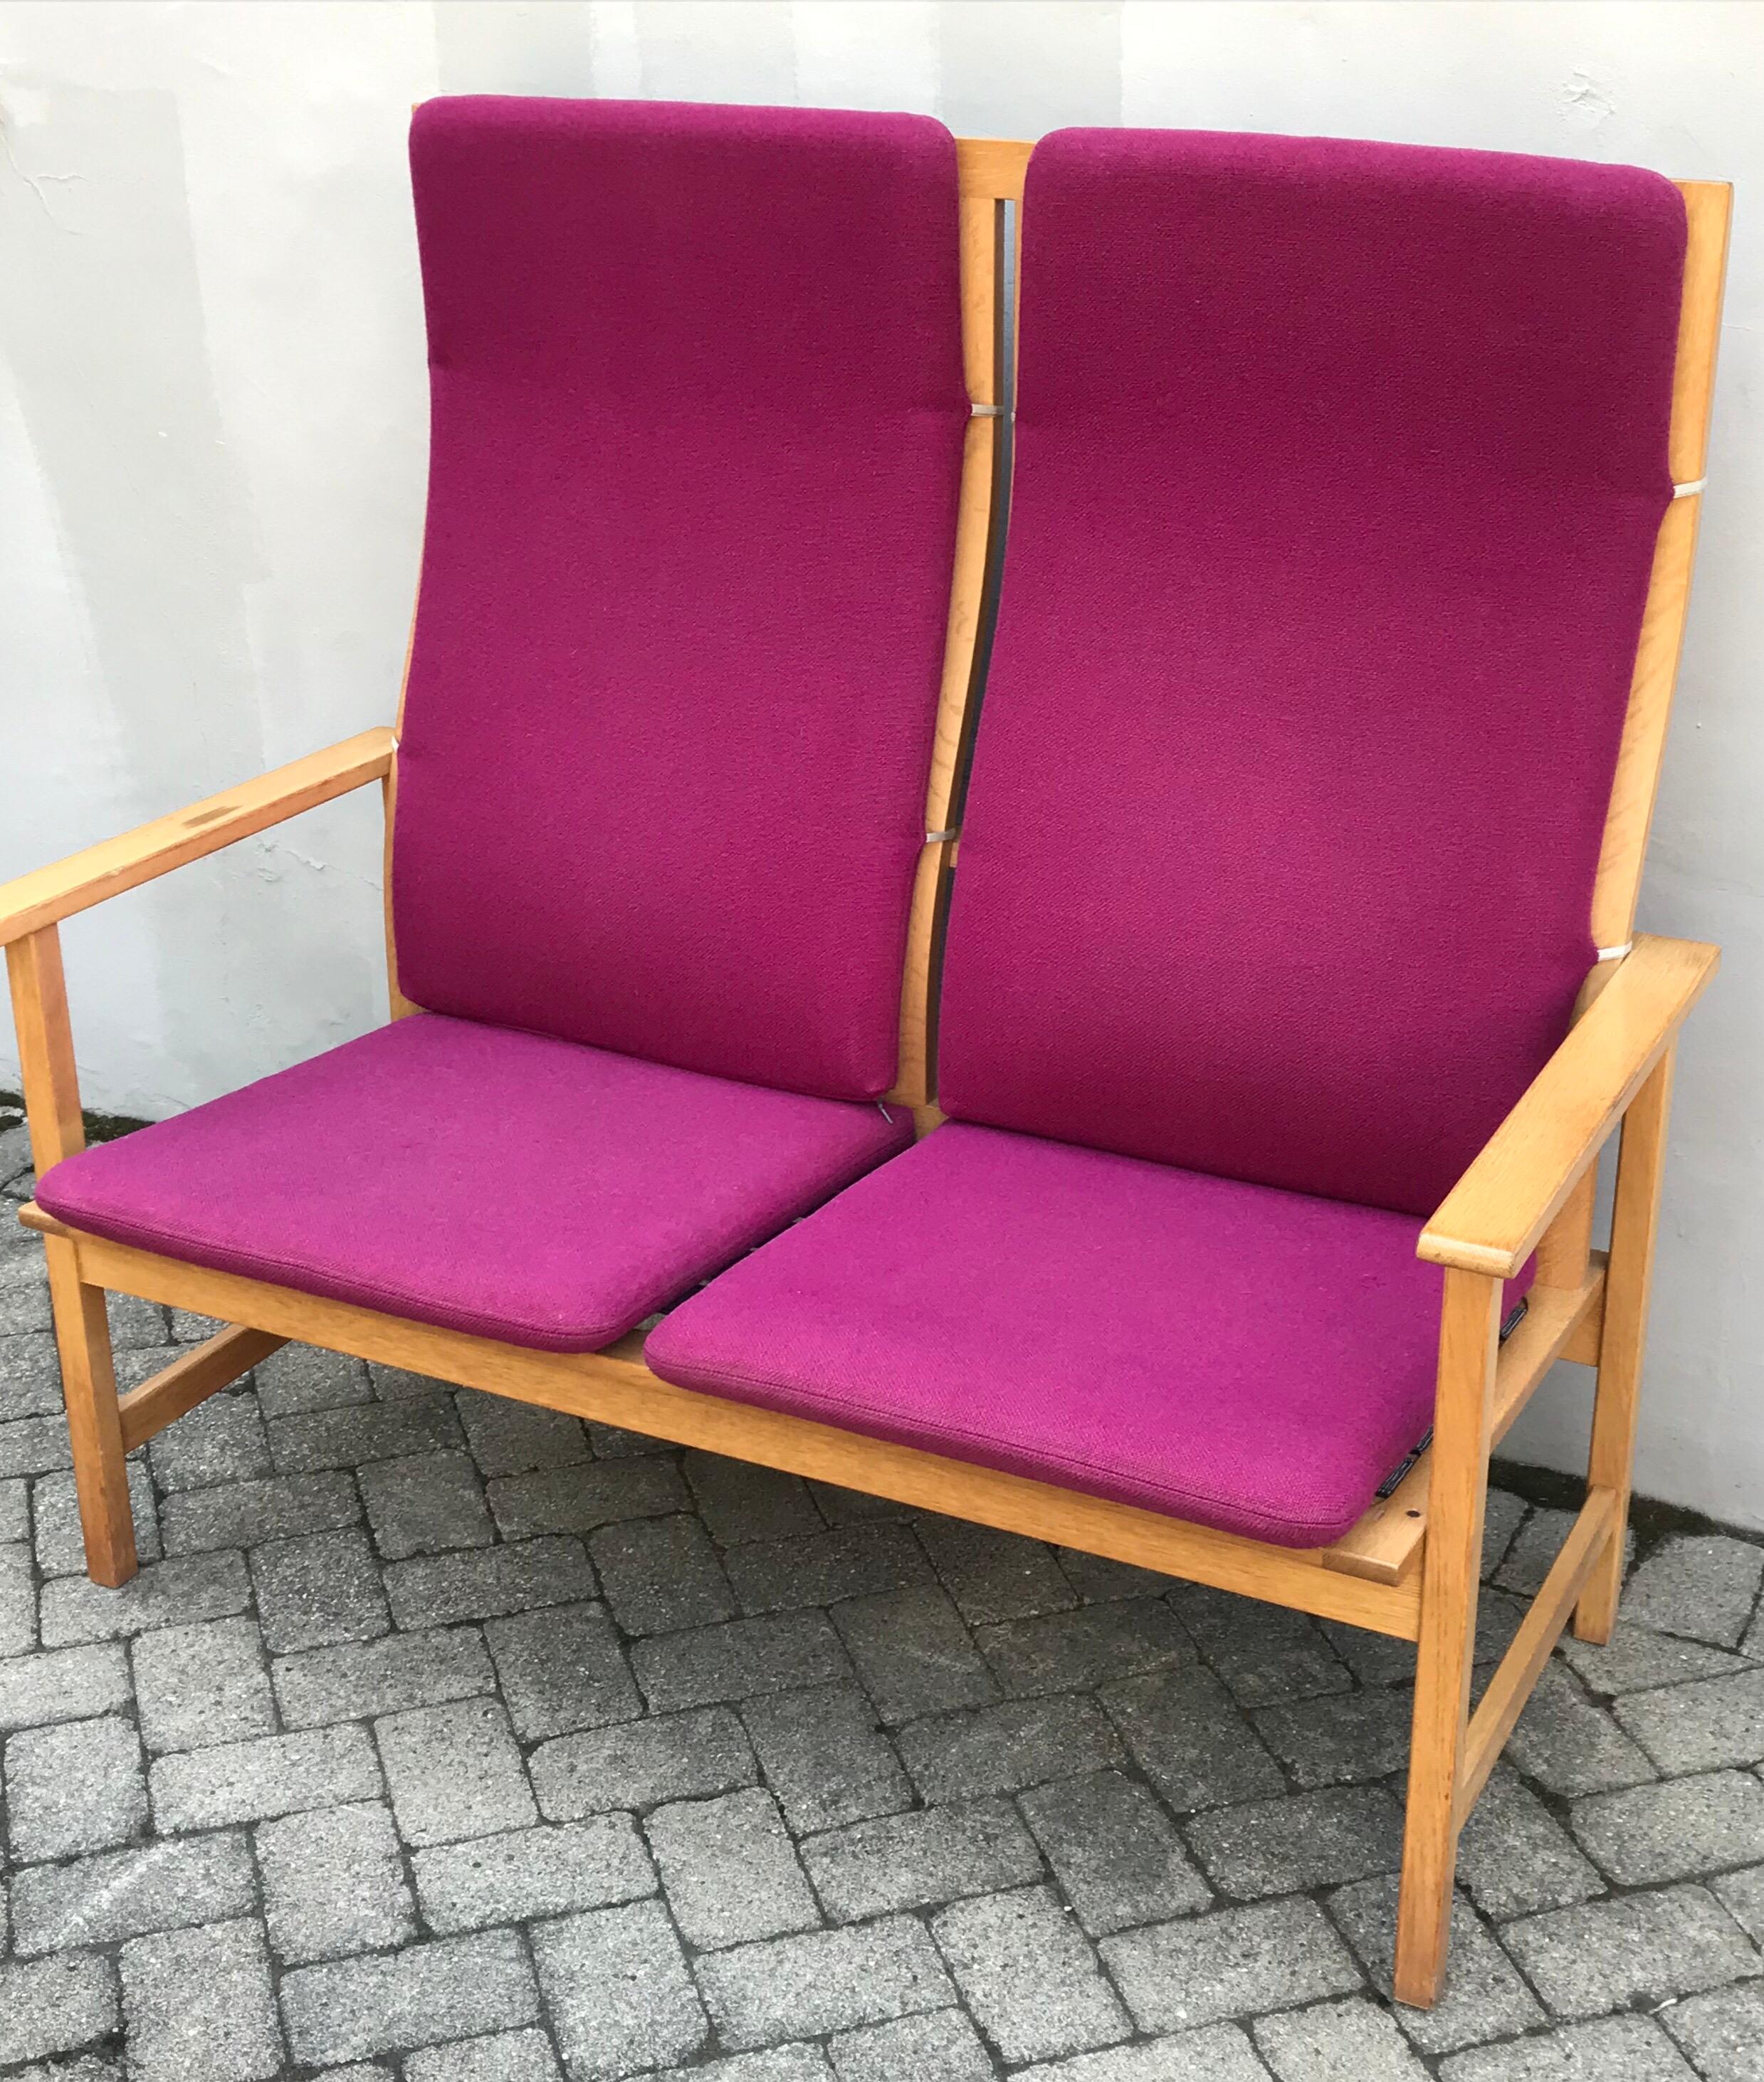 Mid Century bentwood oak frame two-seat bench by Borge Mogensen for Fredericia Stolefabrik, Denmark. Maintains original vibrant raspberry colored cushions, wear appropriate, missing one strap down, one cigarette burn, no stains, many more years of